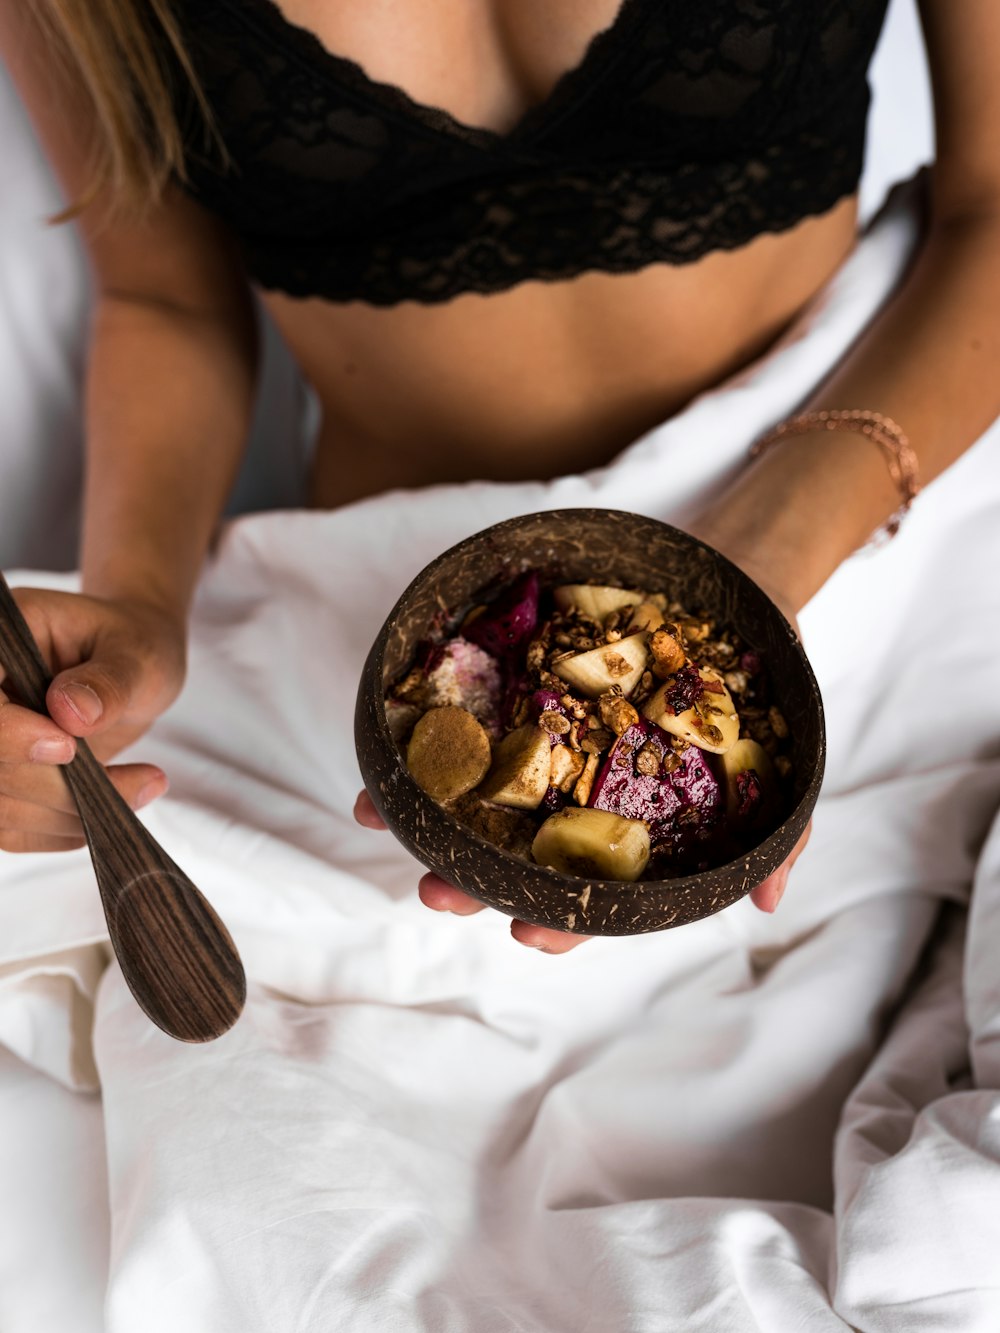 sliced fruits on coconut shell bowl on woman's hand in bed